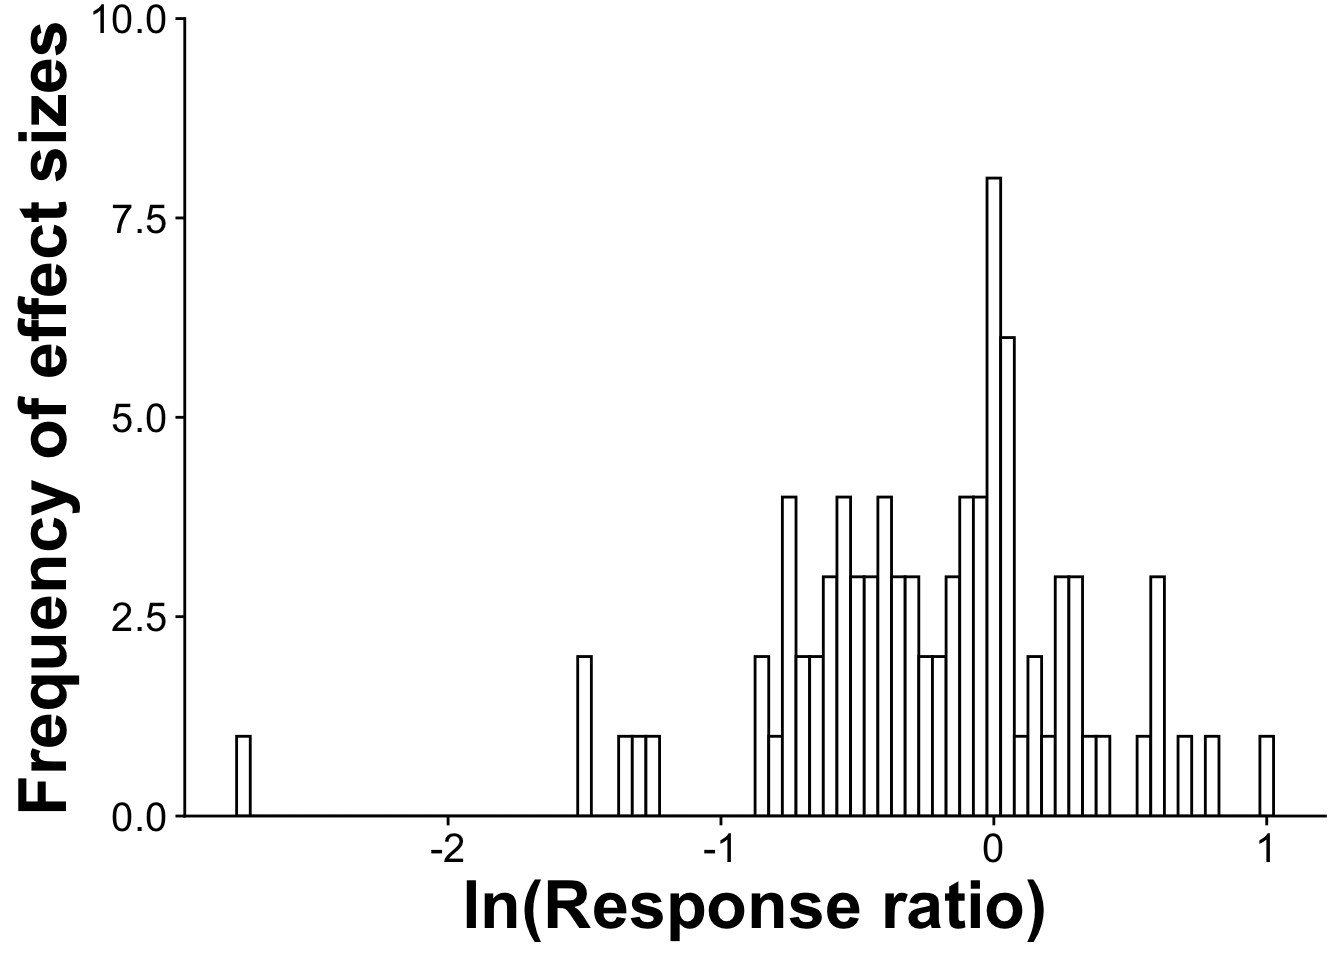 A publication bias histogram where relatively symmetrical histograms indicate a lack of publication bias in your dataset